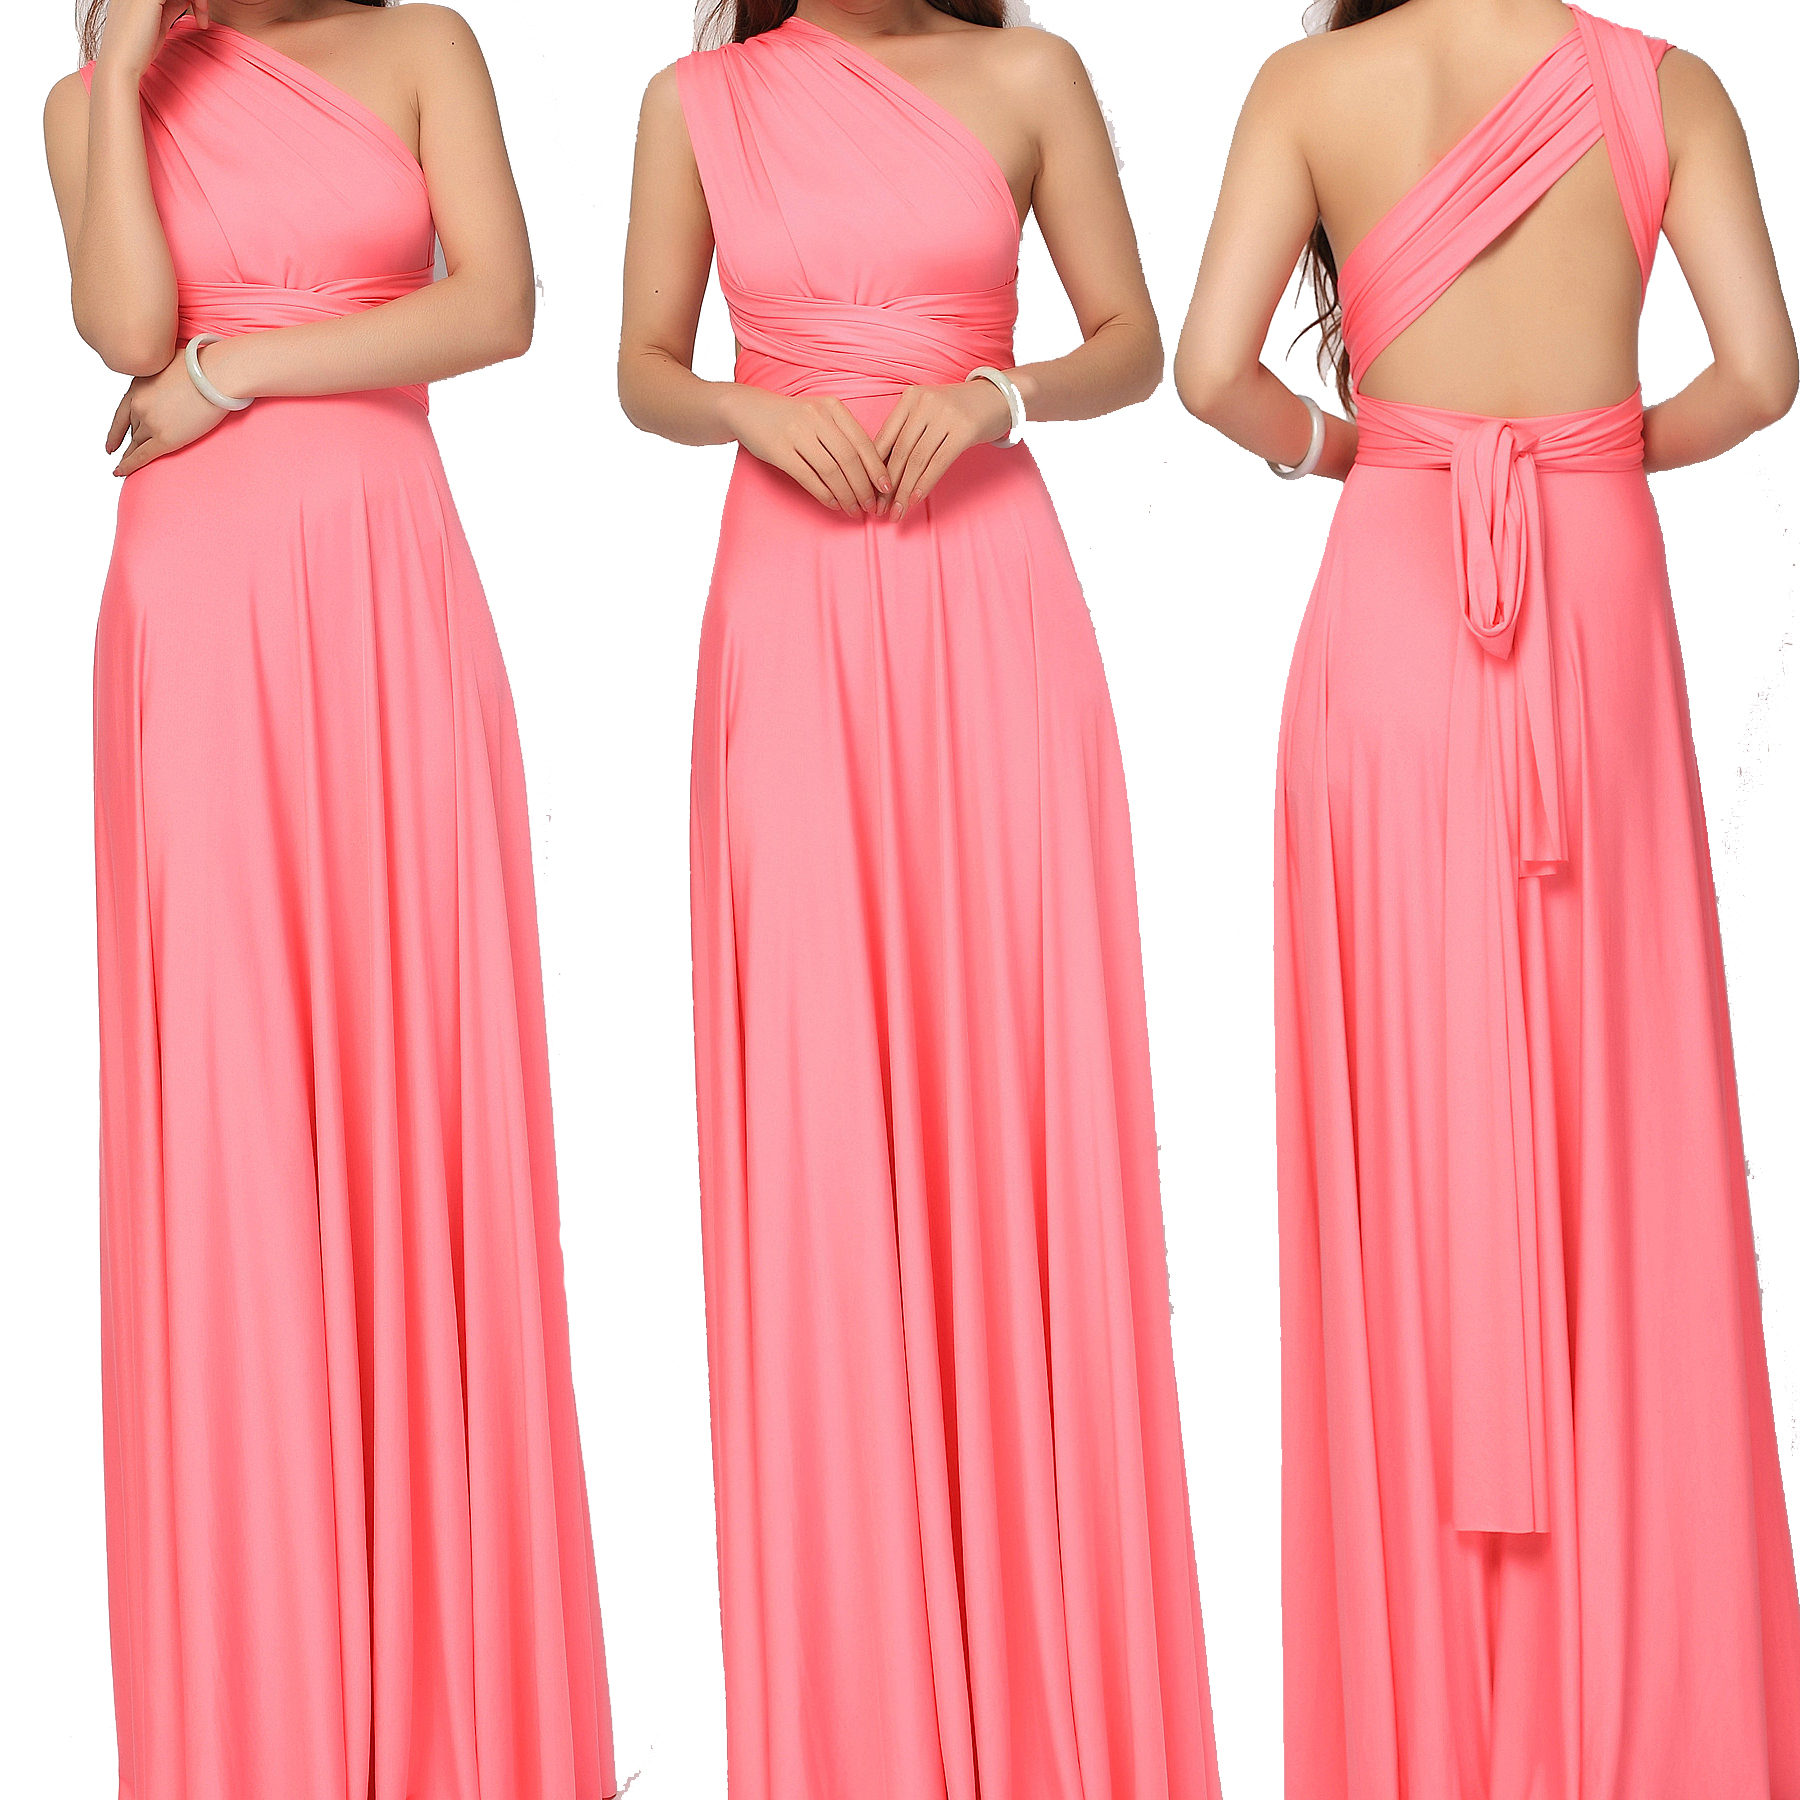 infinity dress coral pink